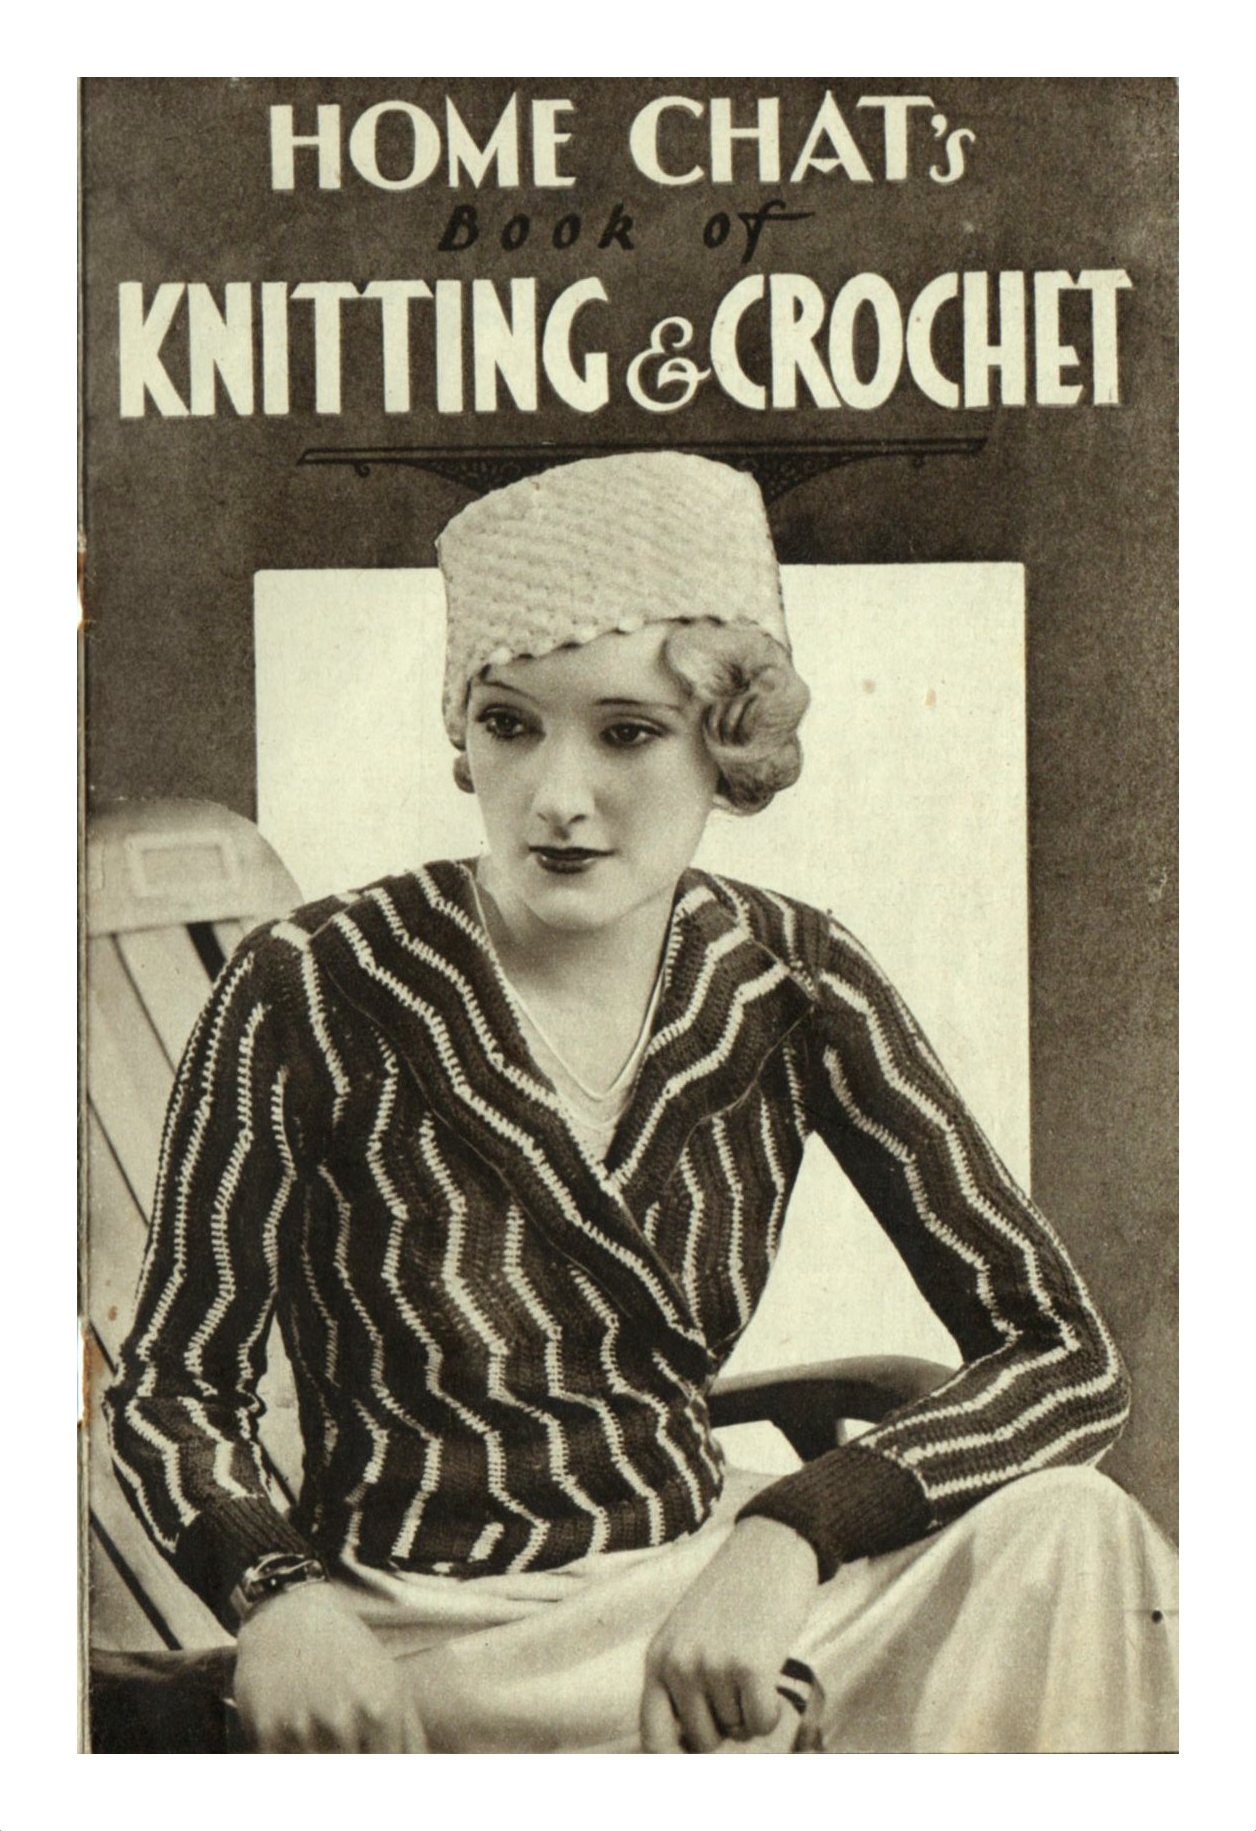 Cover of Home Chat's Book of Knitting & Crochet showing lady with striped knit cross-over cardigan and textured knitted hat